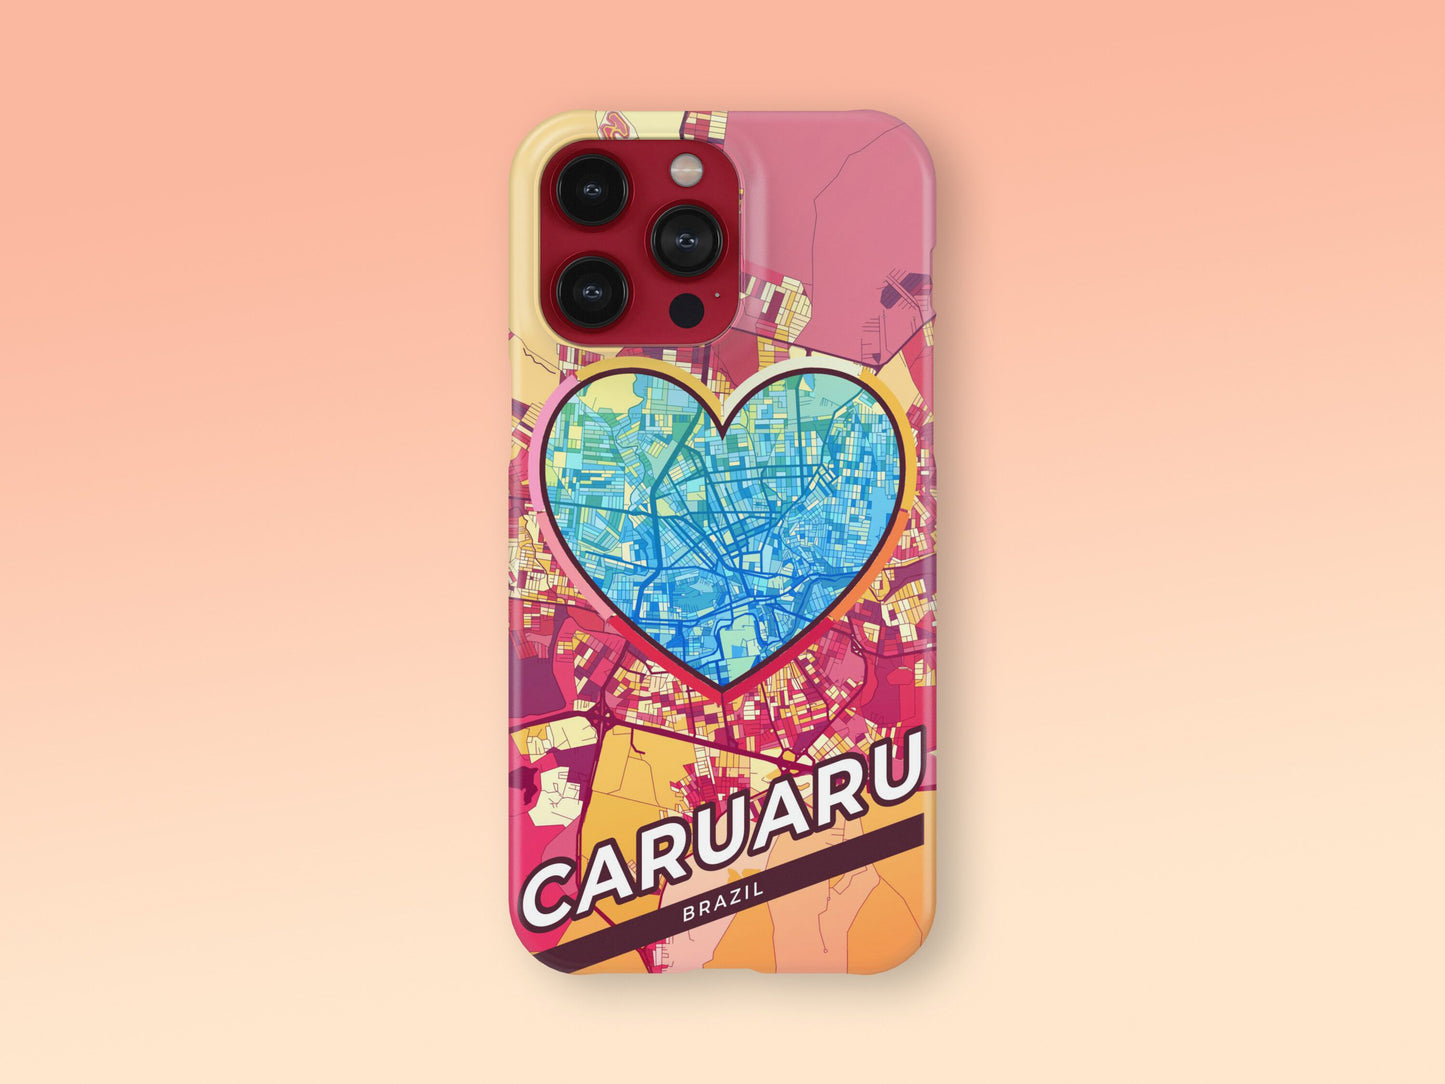 Caruaru Brazil slim phone case with colorful icon. Birthday, wedding or housewarming gift. Couple match cases. 2